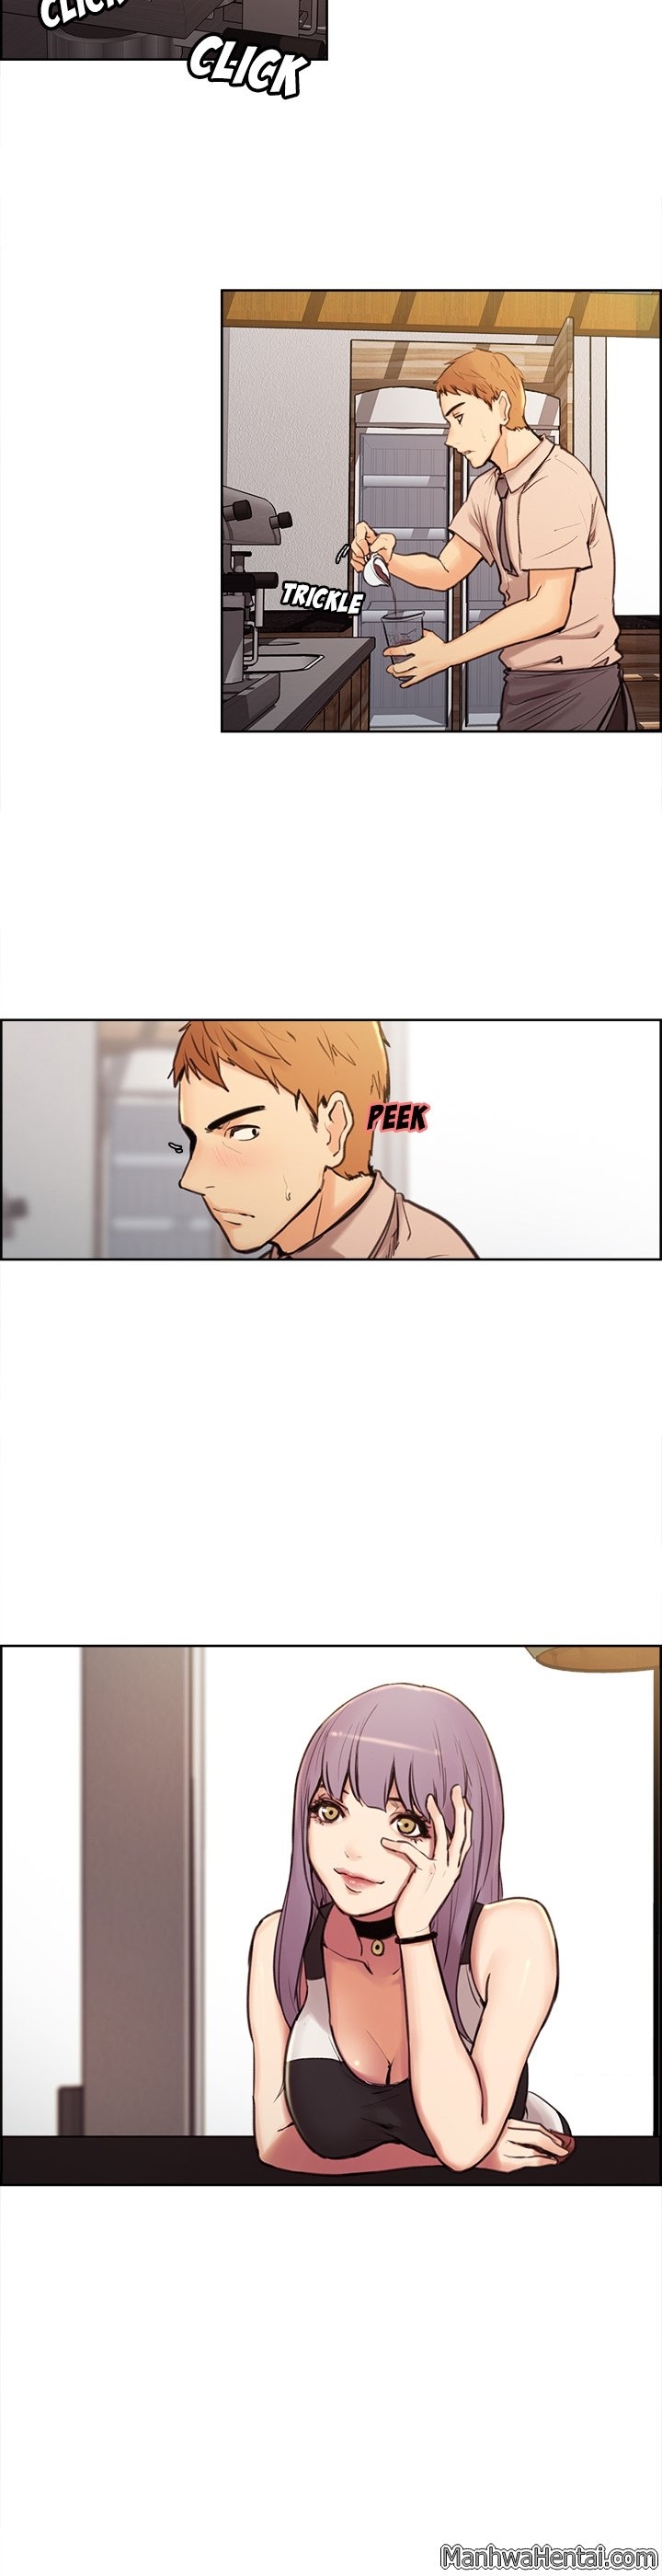 [Serious] The Sharehouse Ch. 1-11 [English] 9